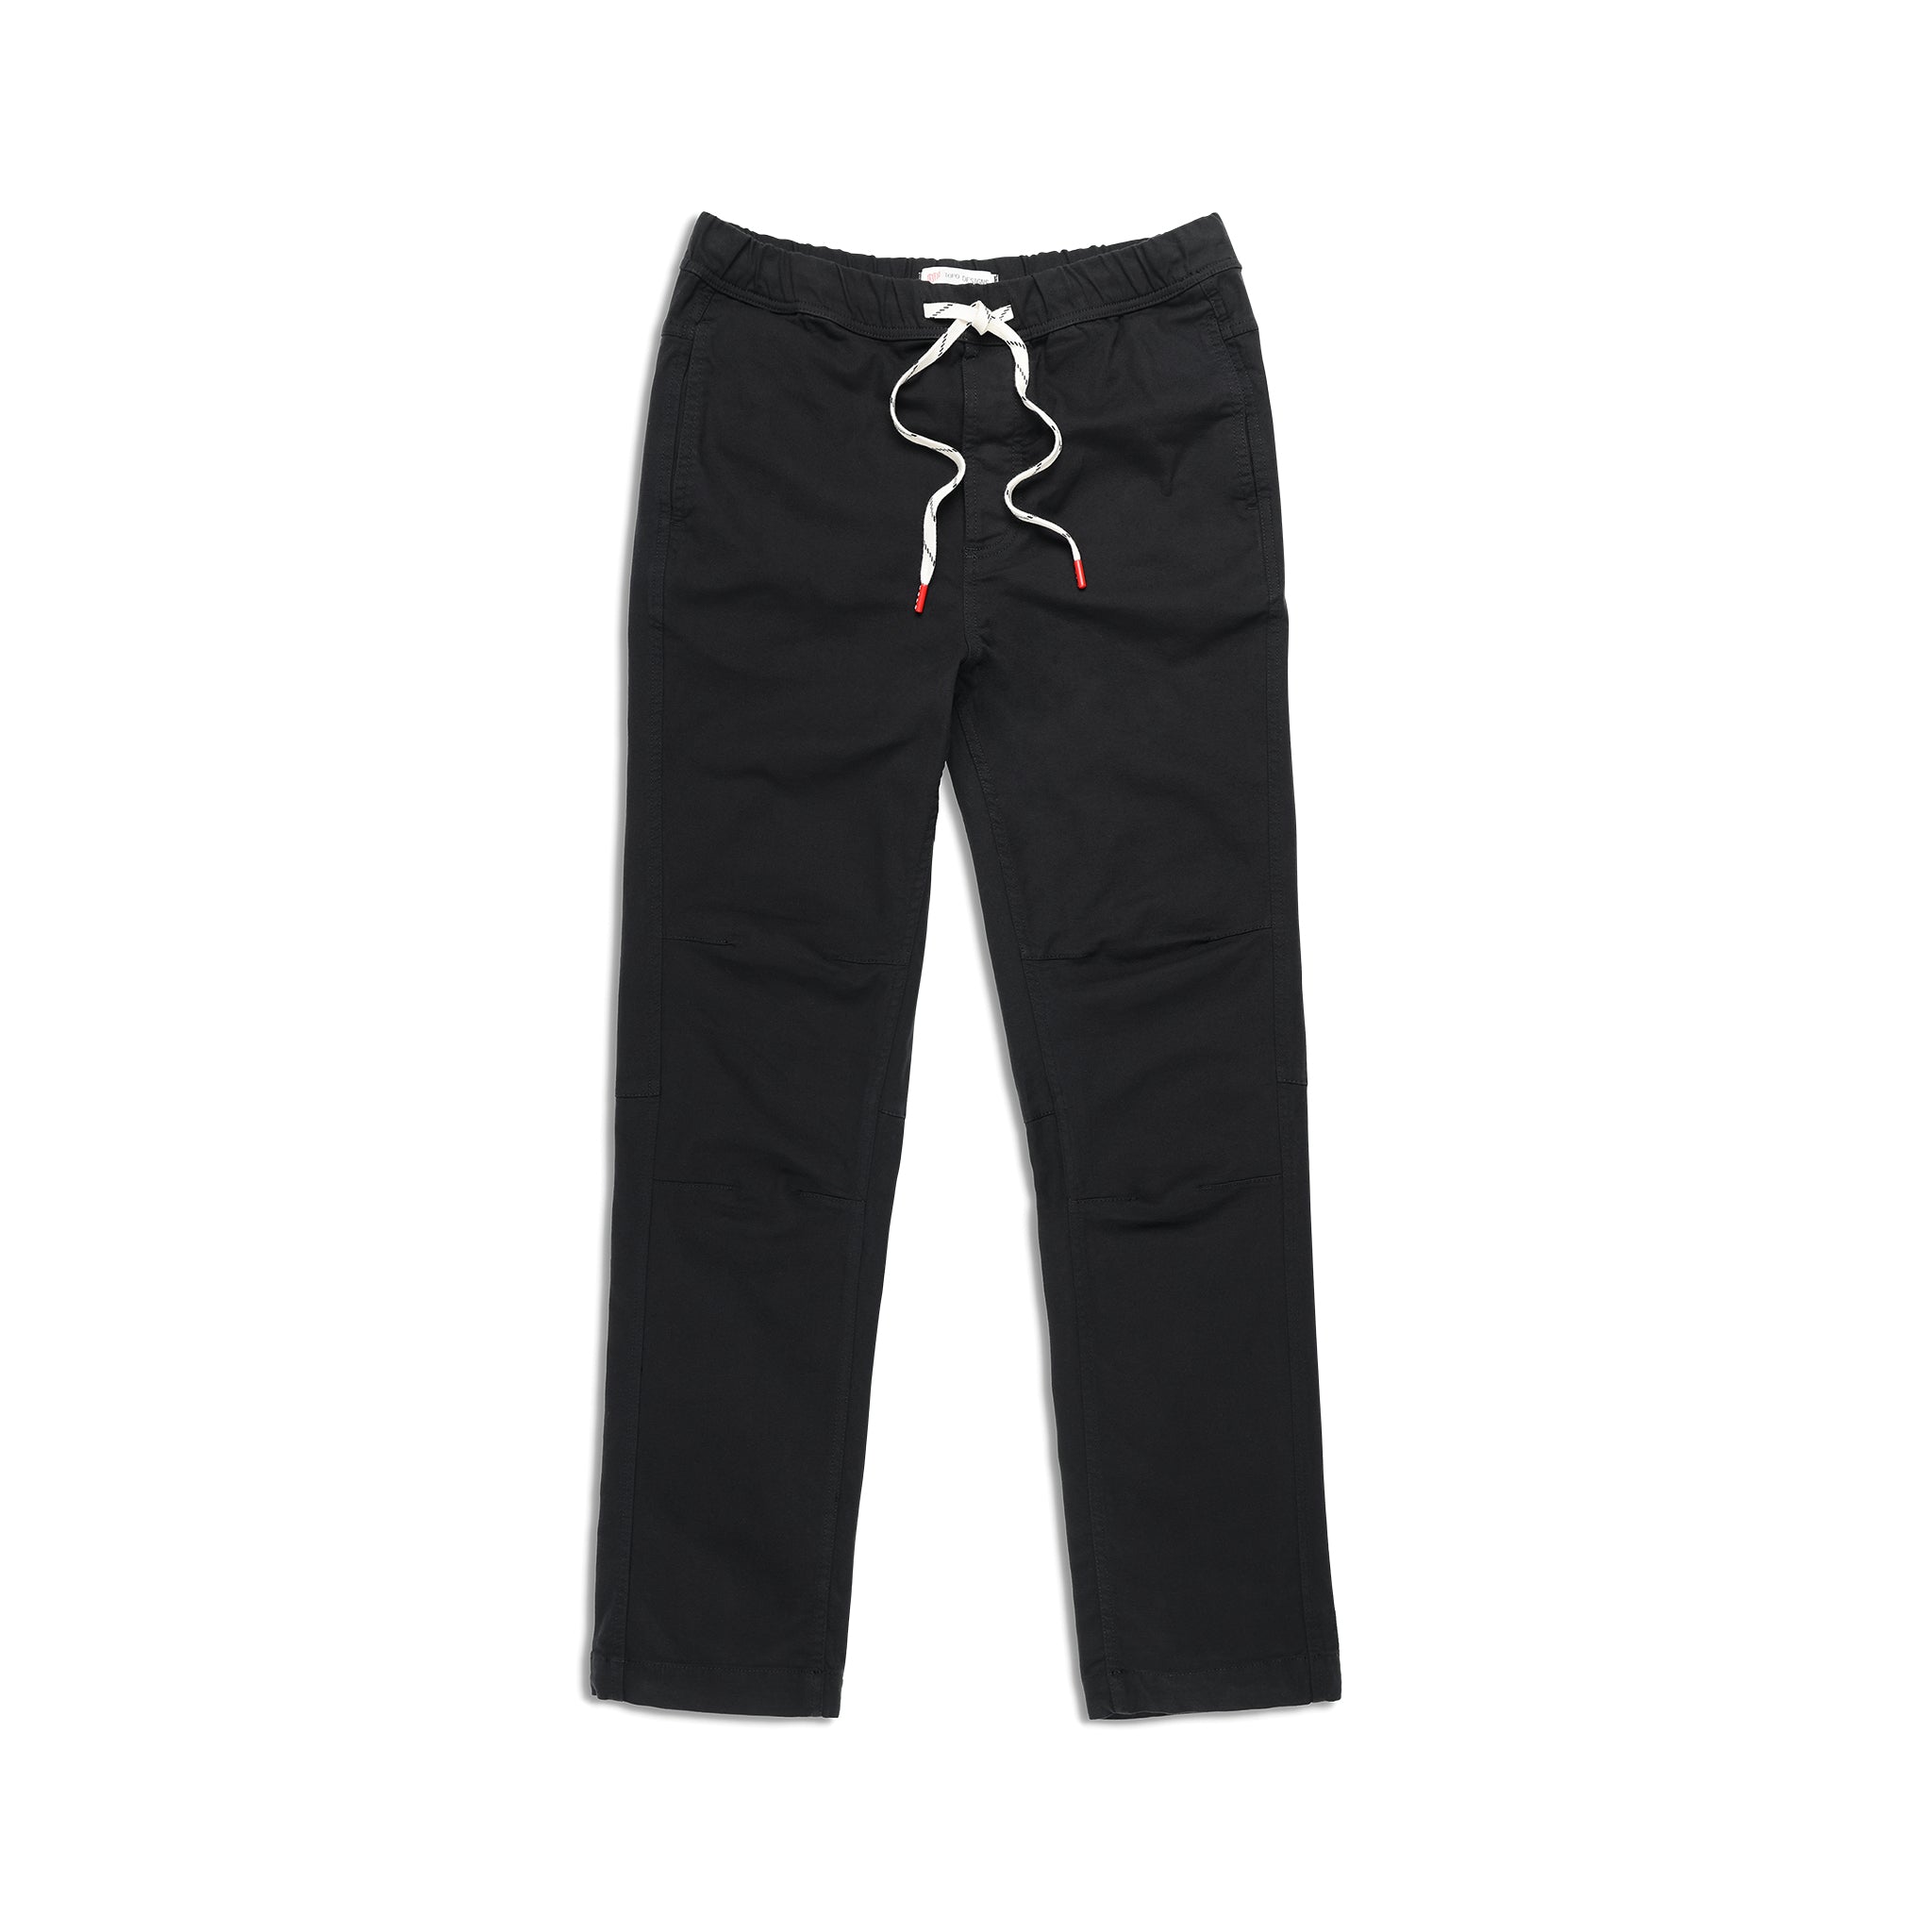 Homma Women's Pants On Sale Up To 90% Off Retail